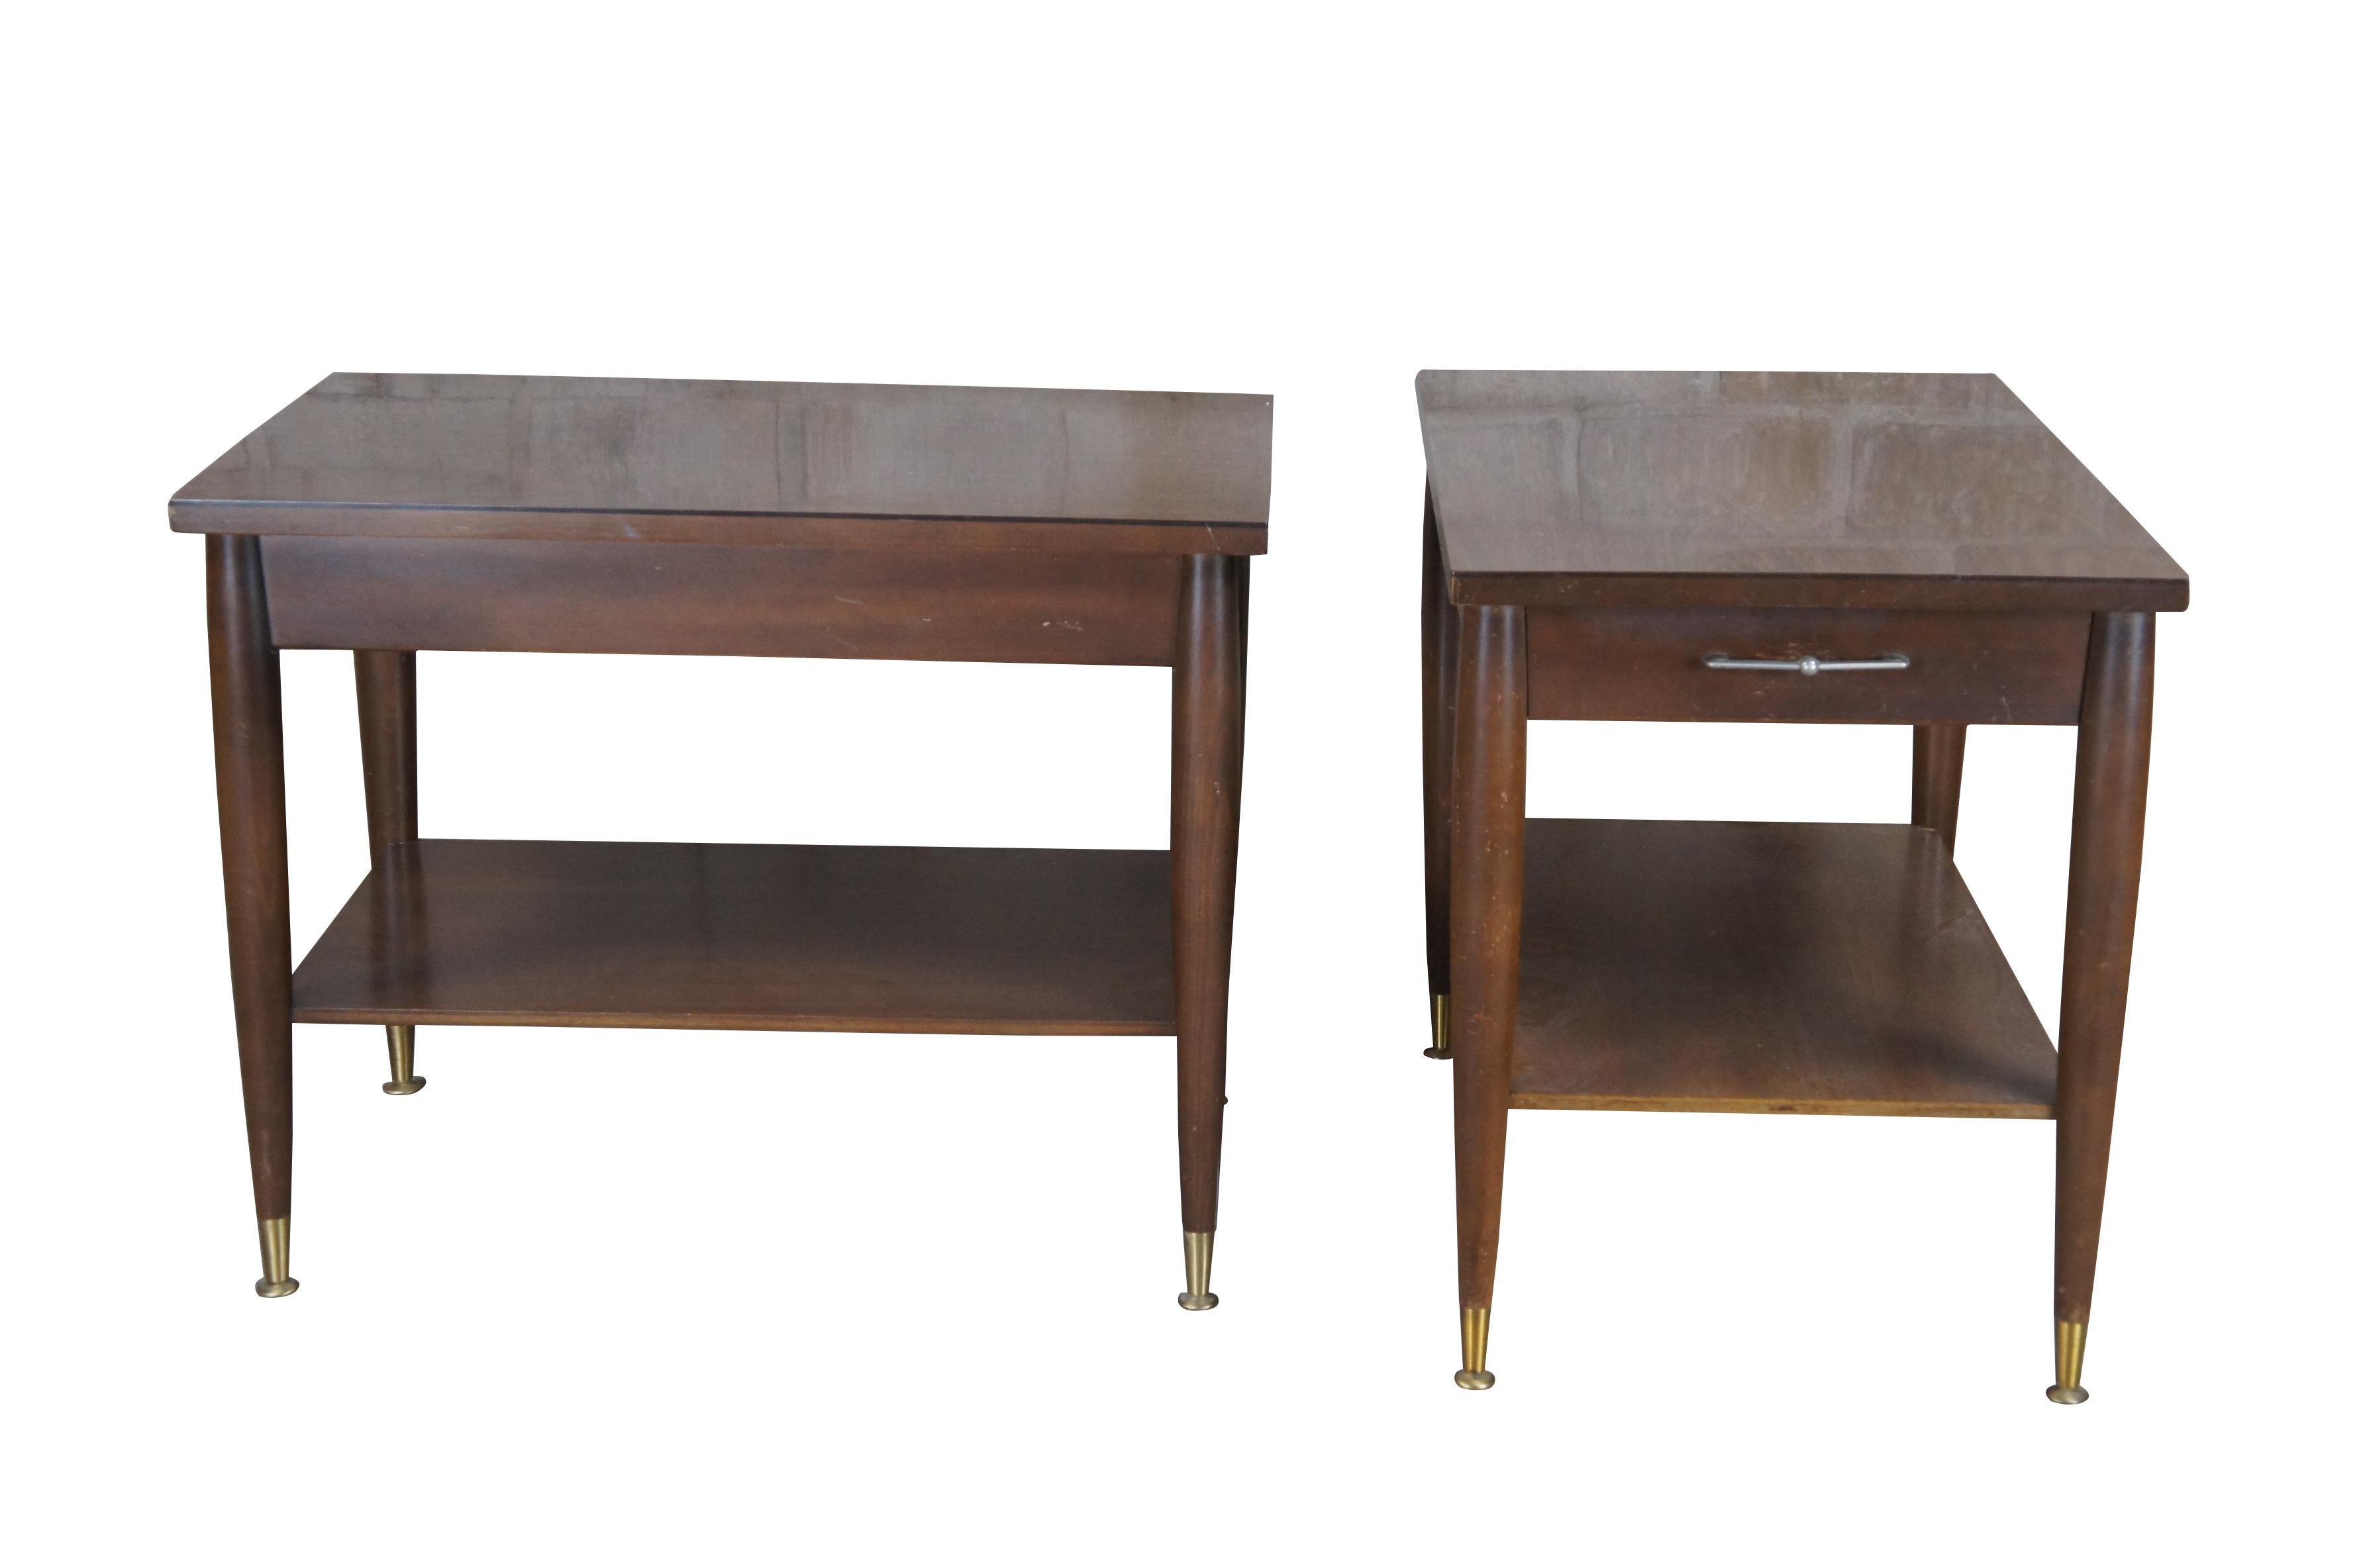 Two mid century modern Mersman end tables.  Made of oak featuring rectangular form with two tier design, one drawer, tapered legs, and brass capped feet.

Dimensions:
27.5